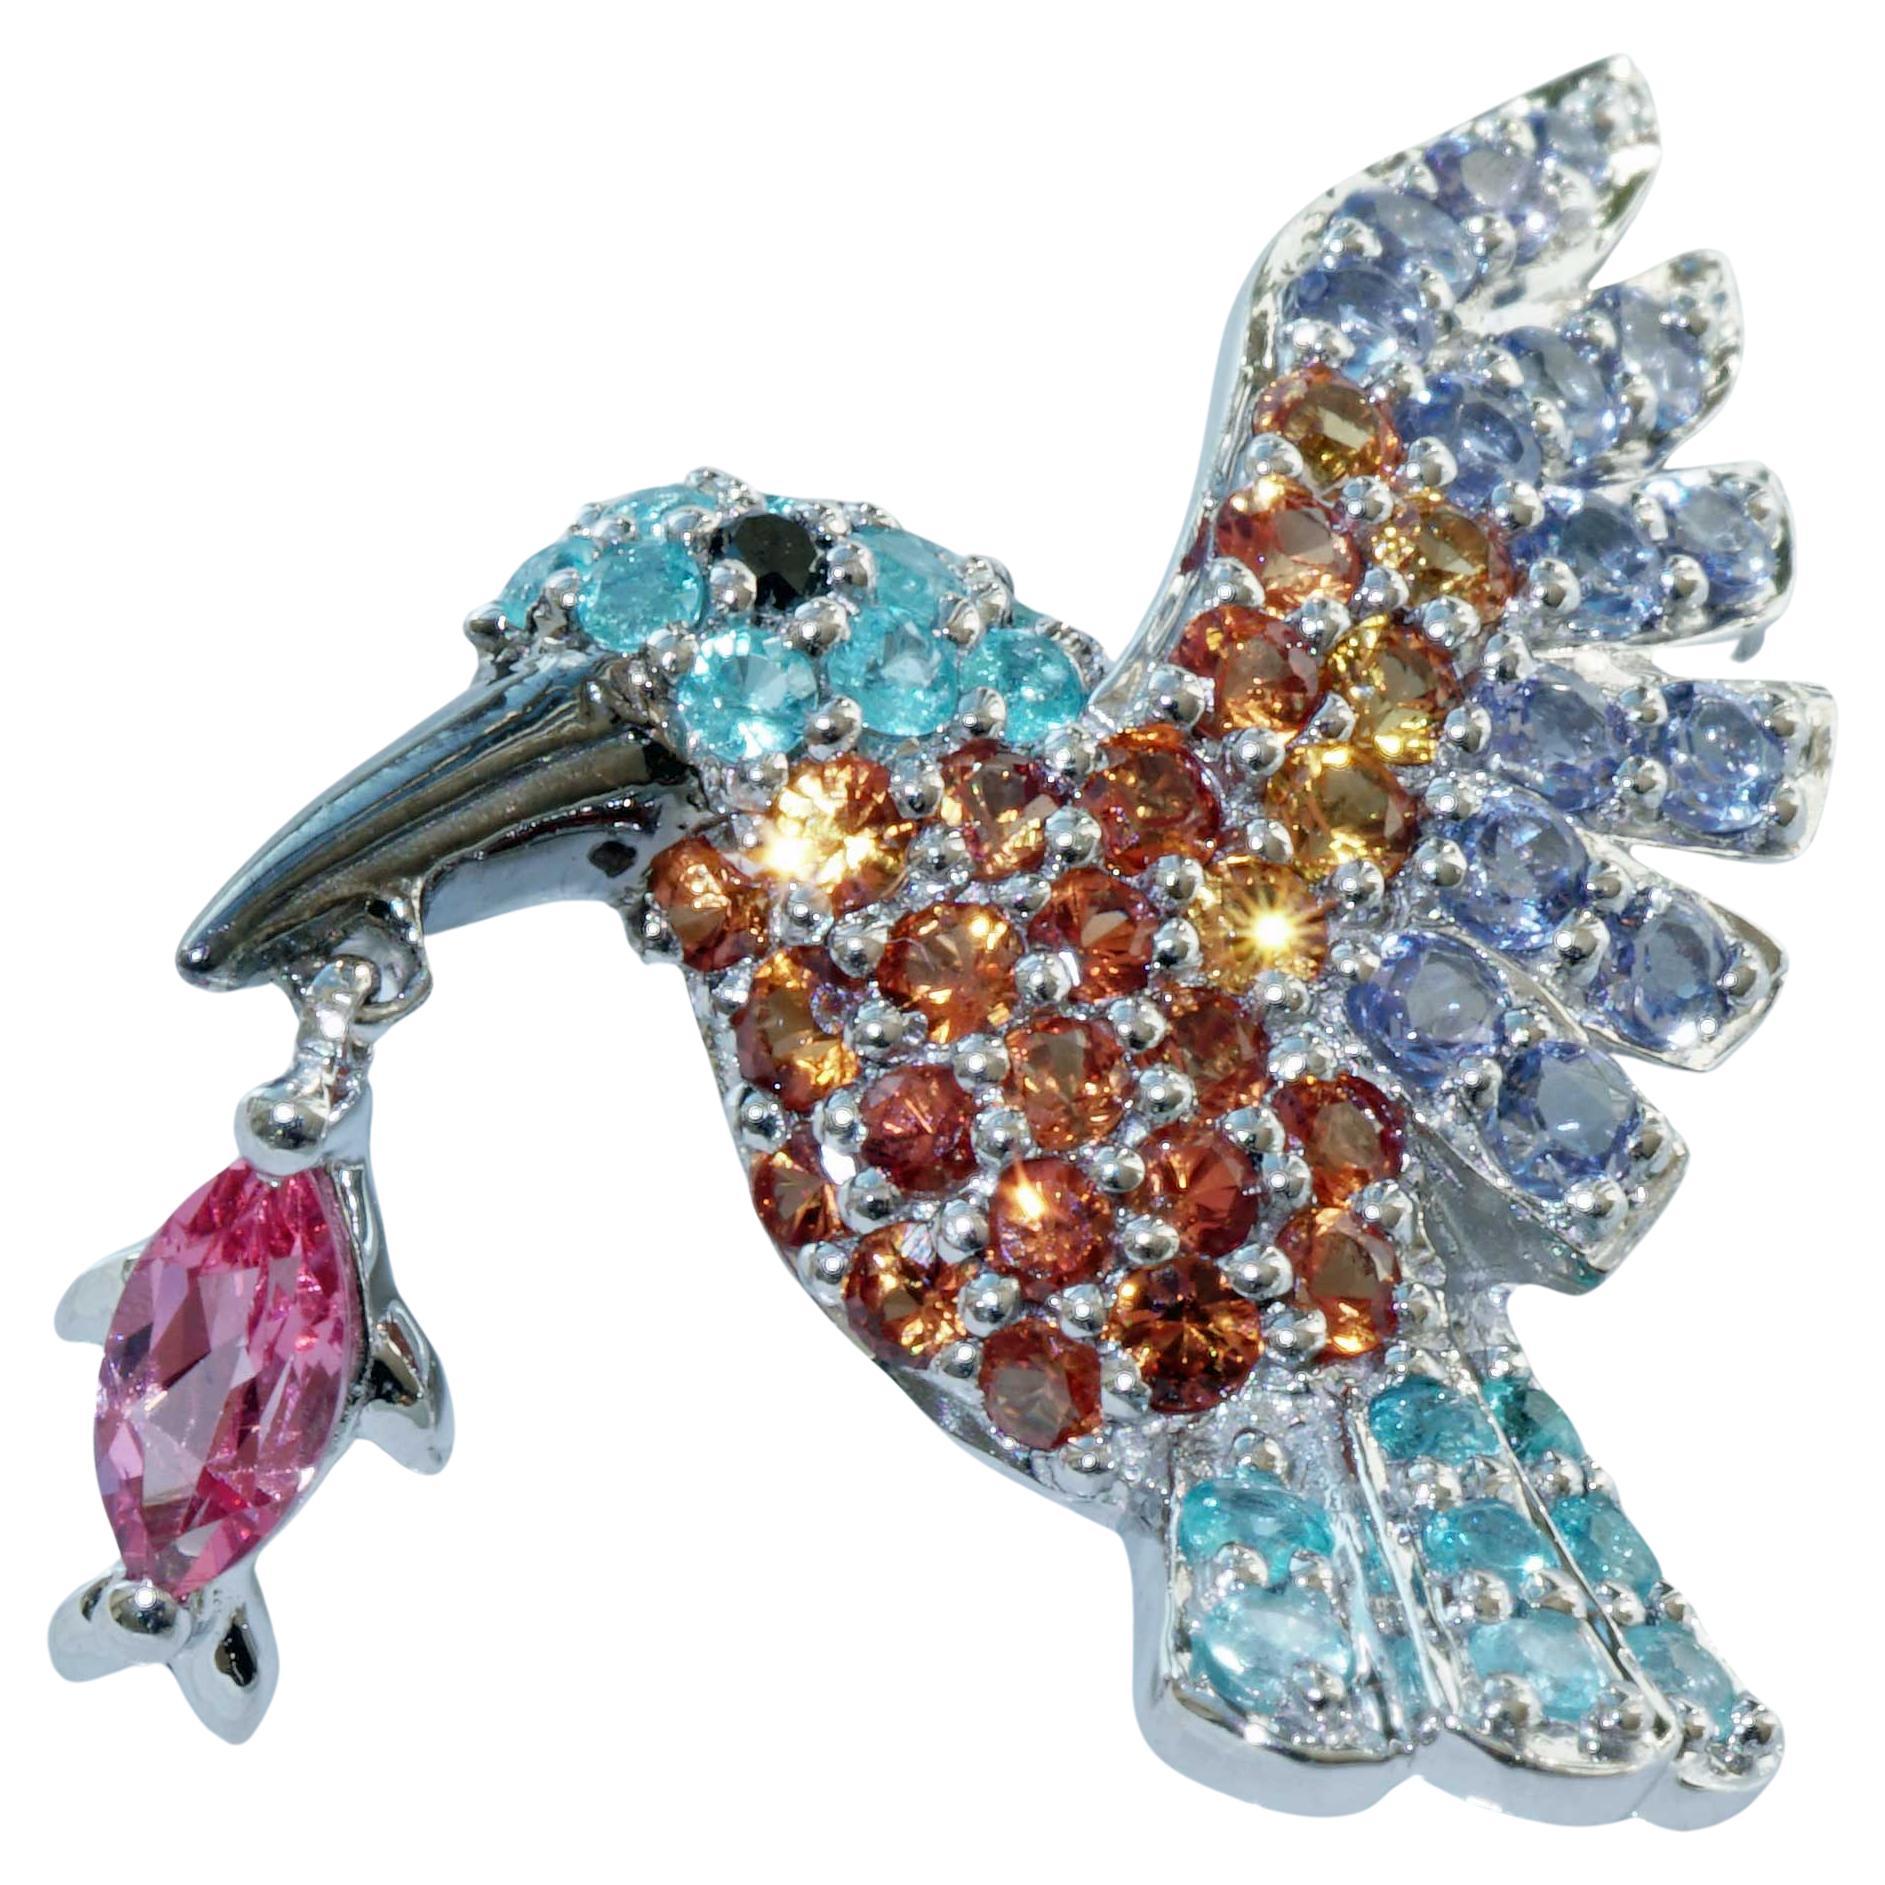 Kingfisher Bird Pendant Paraiba Tourmaline and Spinel most extravagant Colors  For Sale